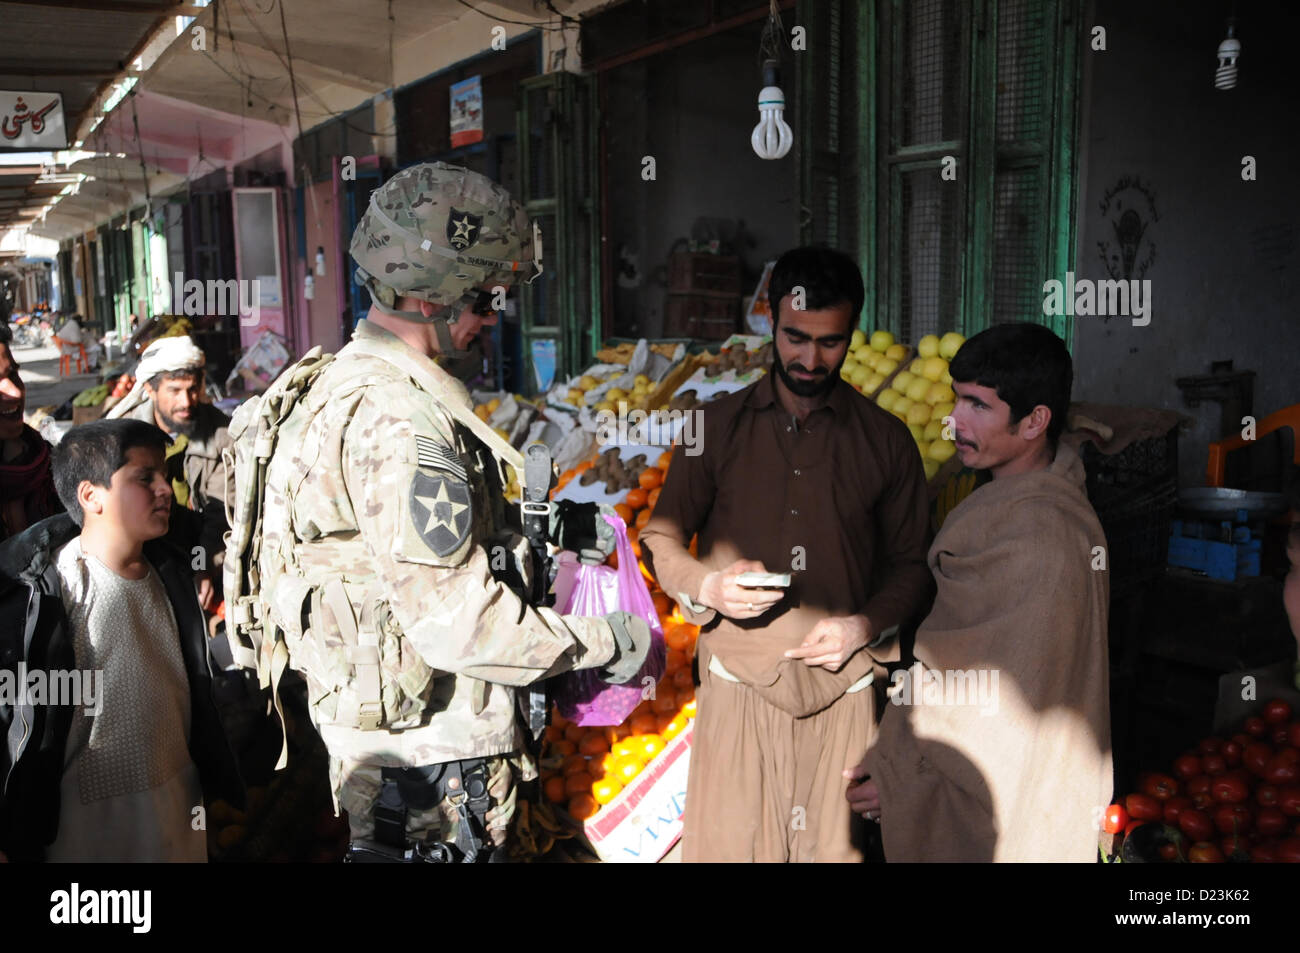 U.S. Army Pfc. Blake Shumway hands a local shopkeeper a handful of Afghani after purchasing a bag full of jujubes, a local specialty, at a Farah City market, Jan. 13.  PRT Farah visiteda nearby bank to discuss small business development and growth initiatives in Farah.  PRT Farah's mission is to train, advise, and assist Afghan government leaders at the municipal, district, and provincial levels in Farah province Afghanistan.  Their civil military team is comprised of members of the U.S. Navy, U.S. Army, the U.S. Department of State and the U.S. Agency for International Development (USAID).  ( Stock Photo